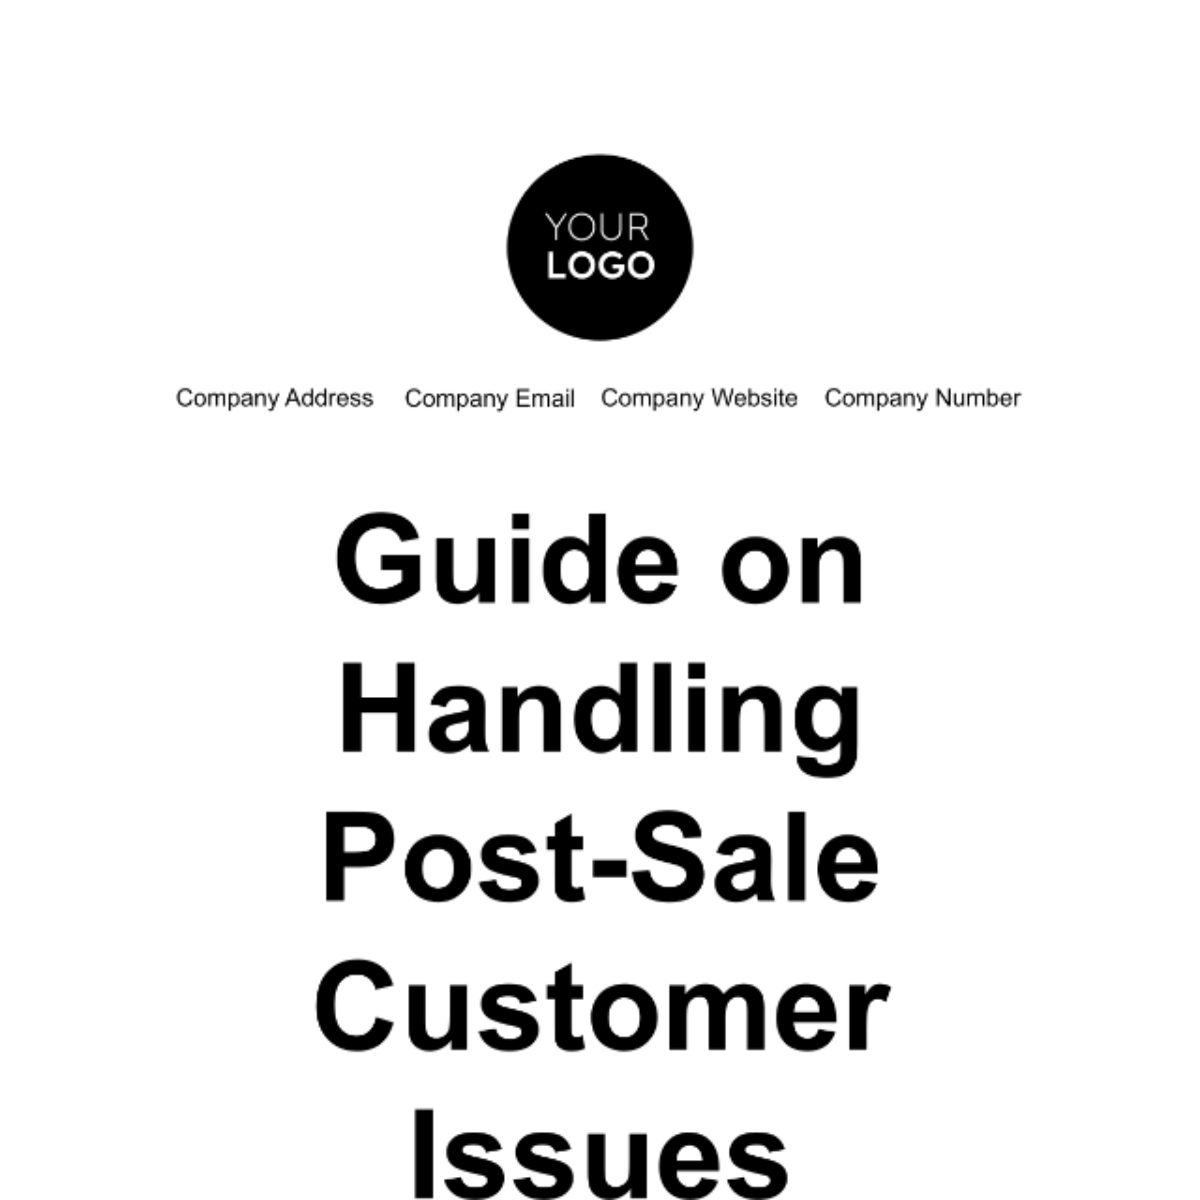 Guide on Handling Post-Sale Customer Issues Template